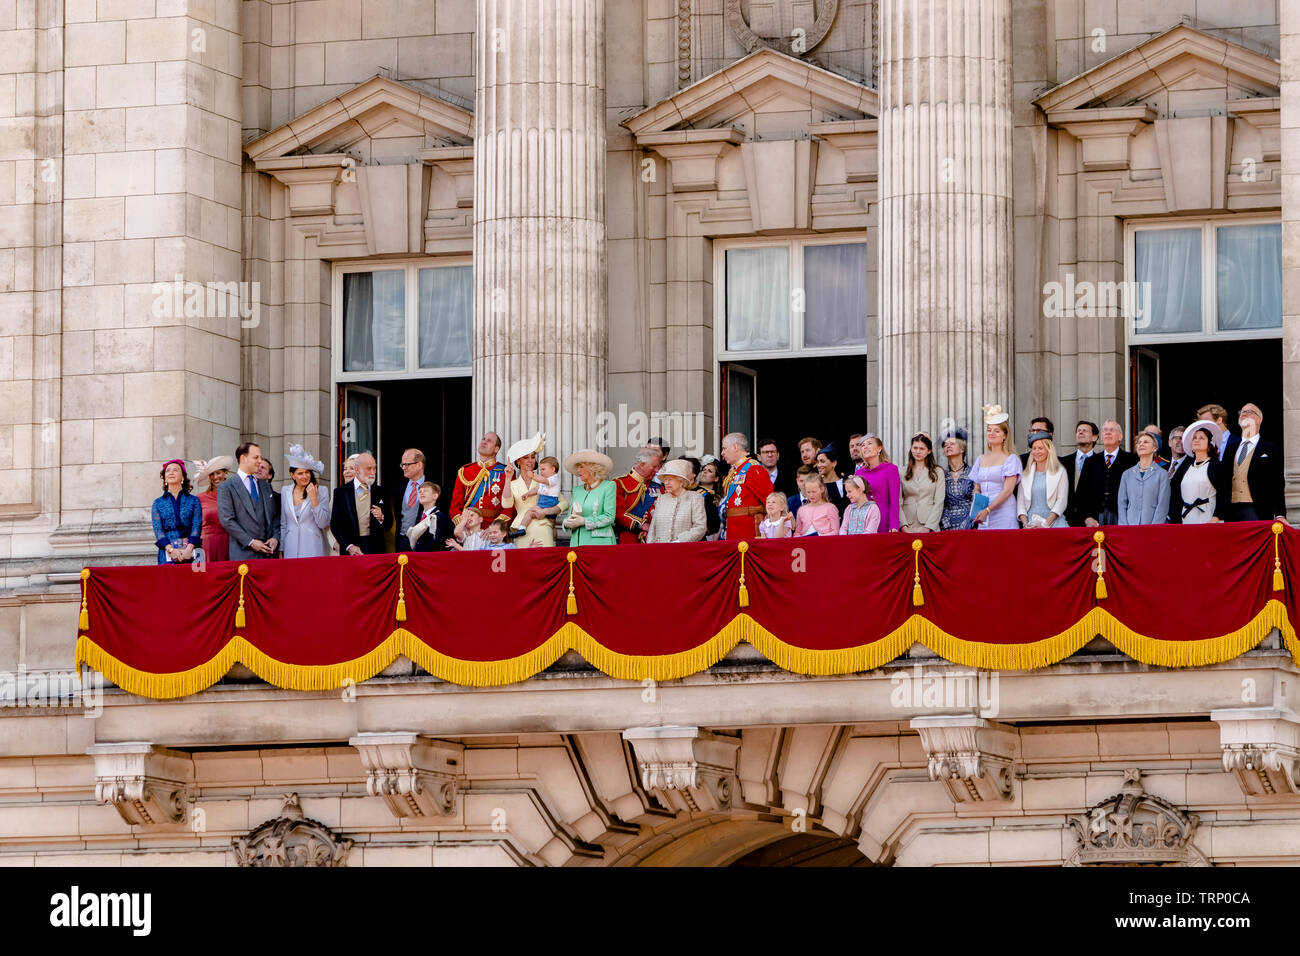 The Queen and members of The Royal Family gather together on the Buckingham Palace balcony following the Trooping The Colour Parade, London, UK, 2019 Stock Photo